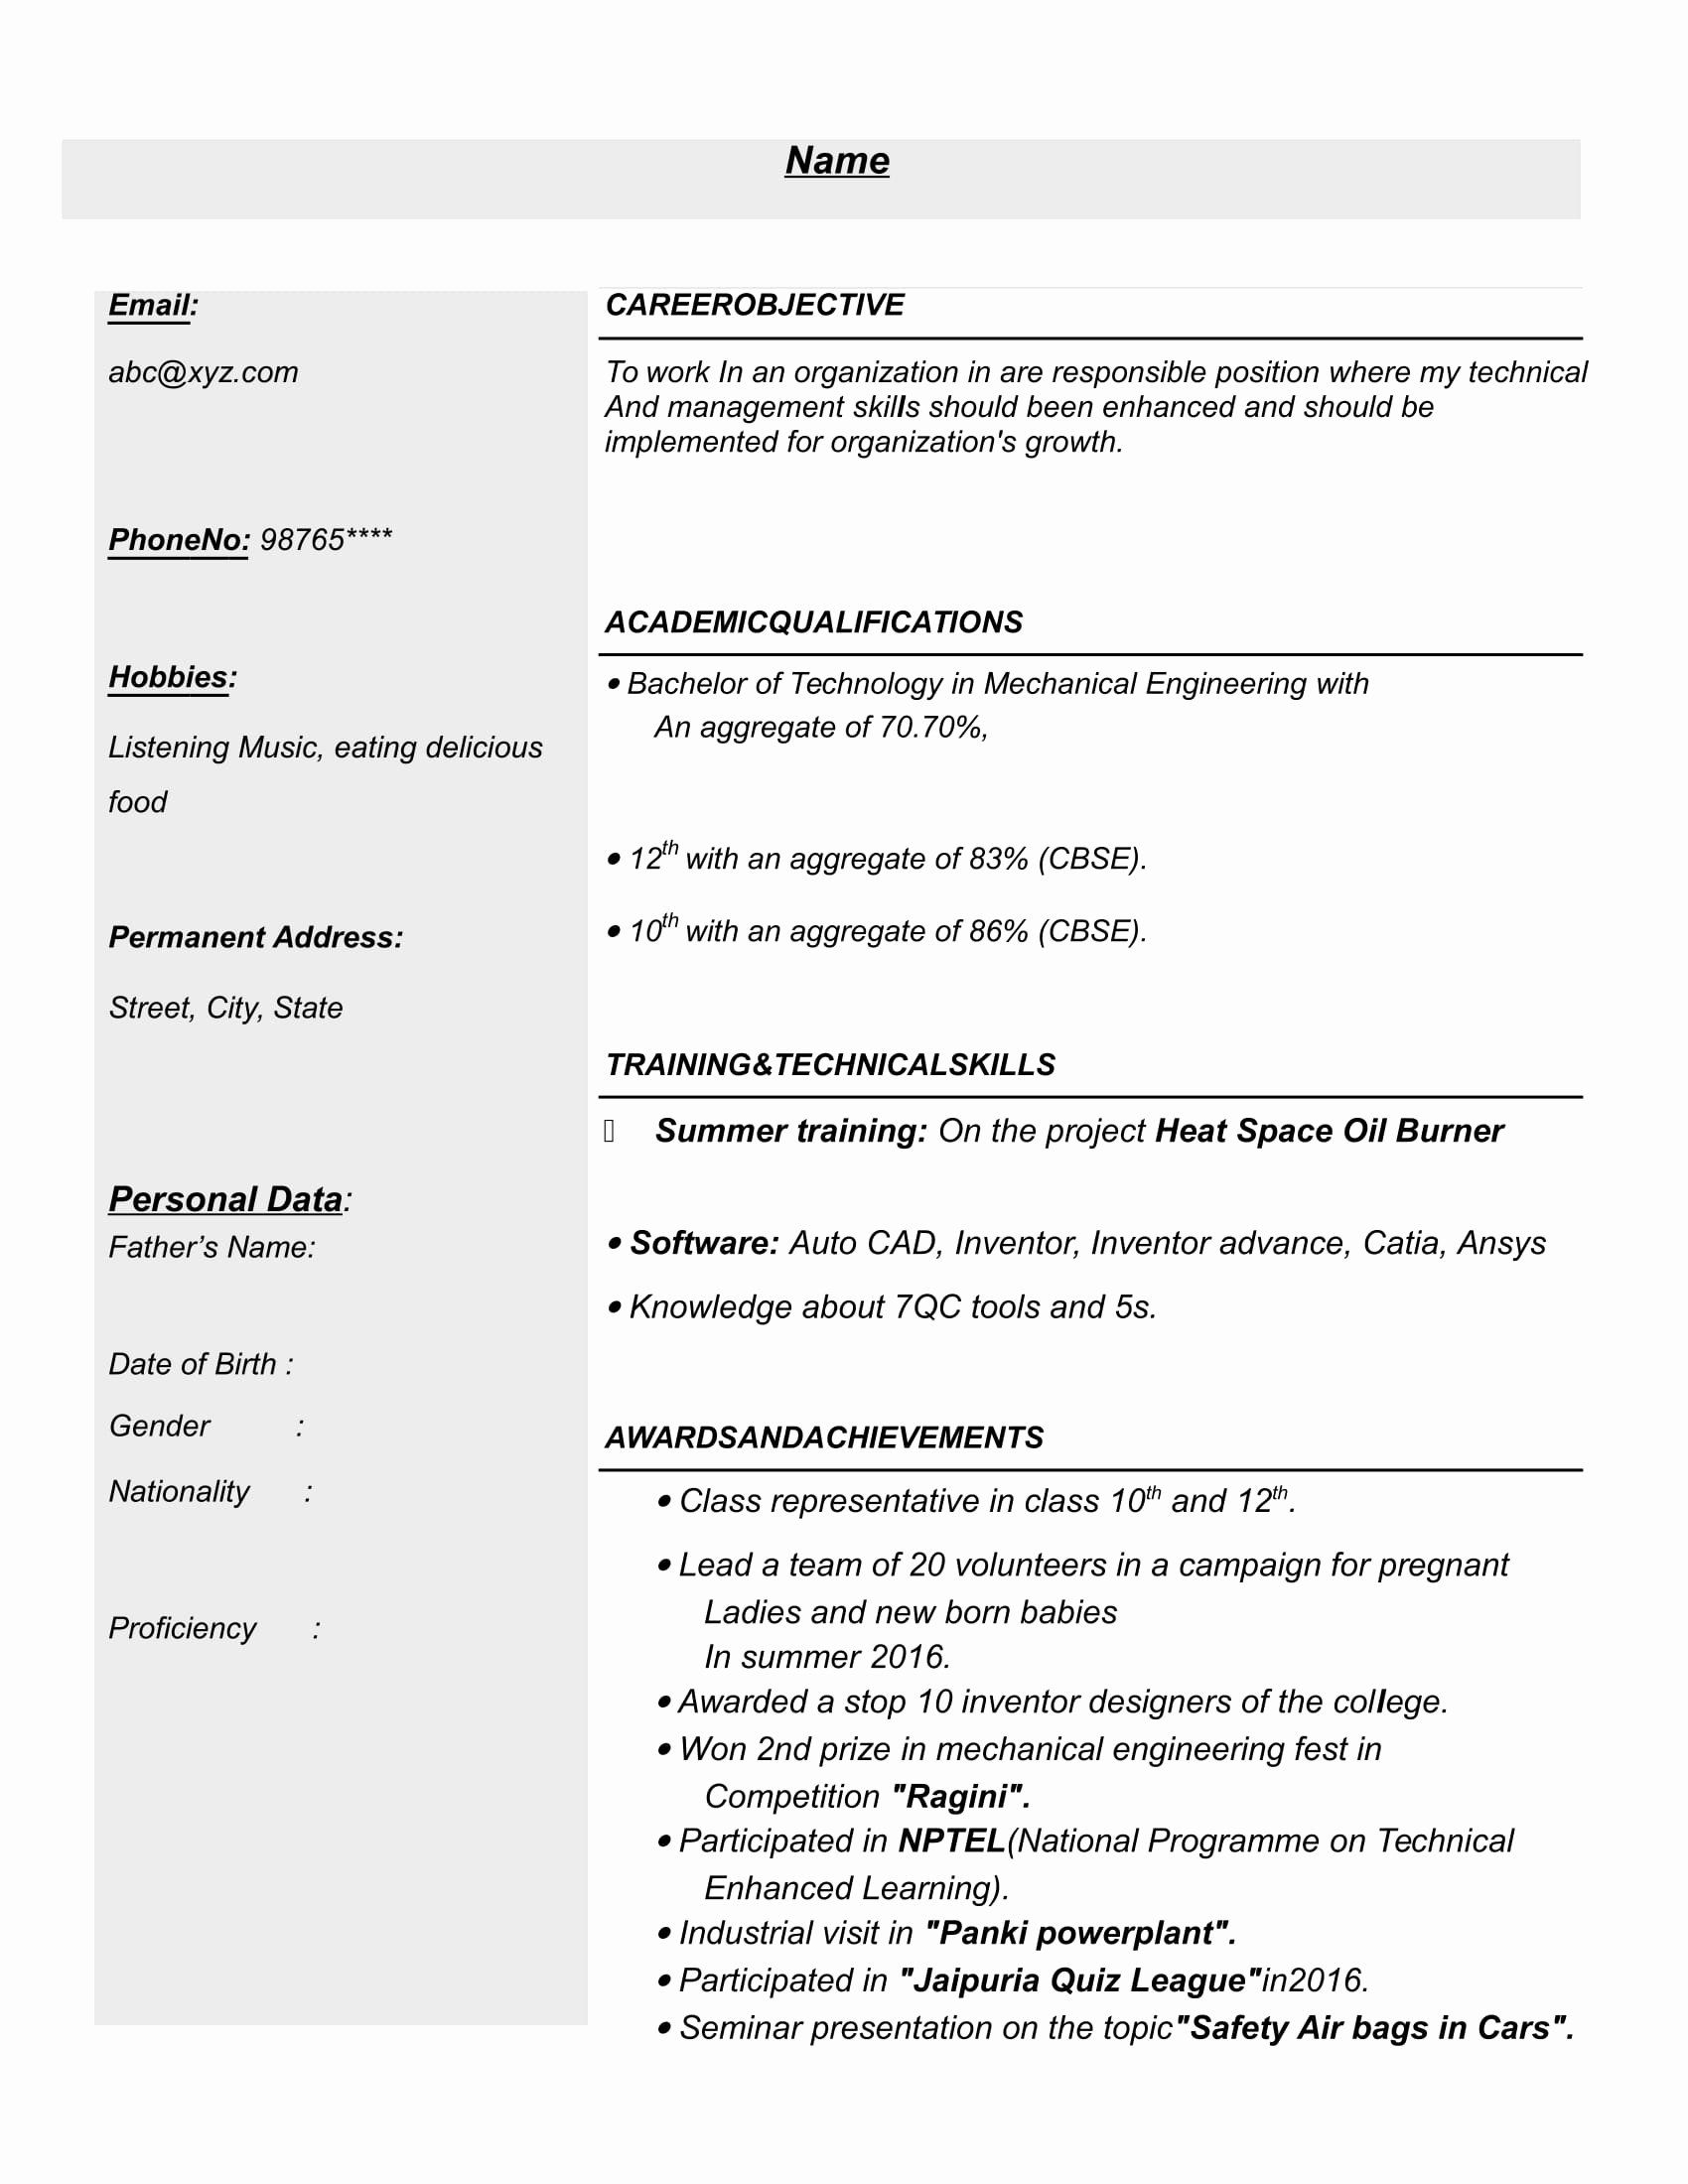 Mechanical Engineering Resume Templates Beautiful Resume Templates for Mechanical Engineer Freshers Download Free